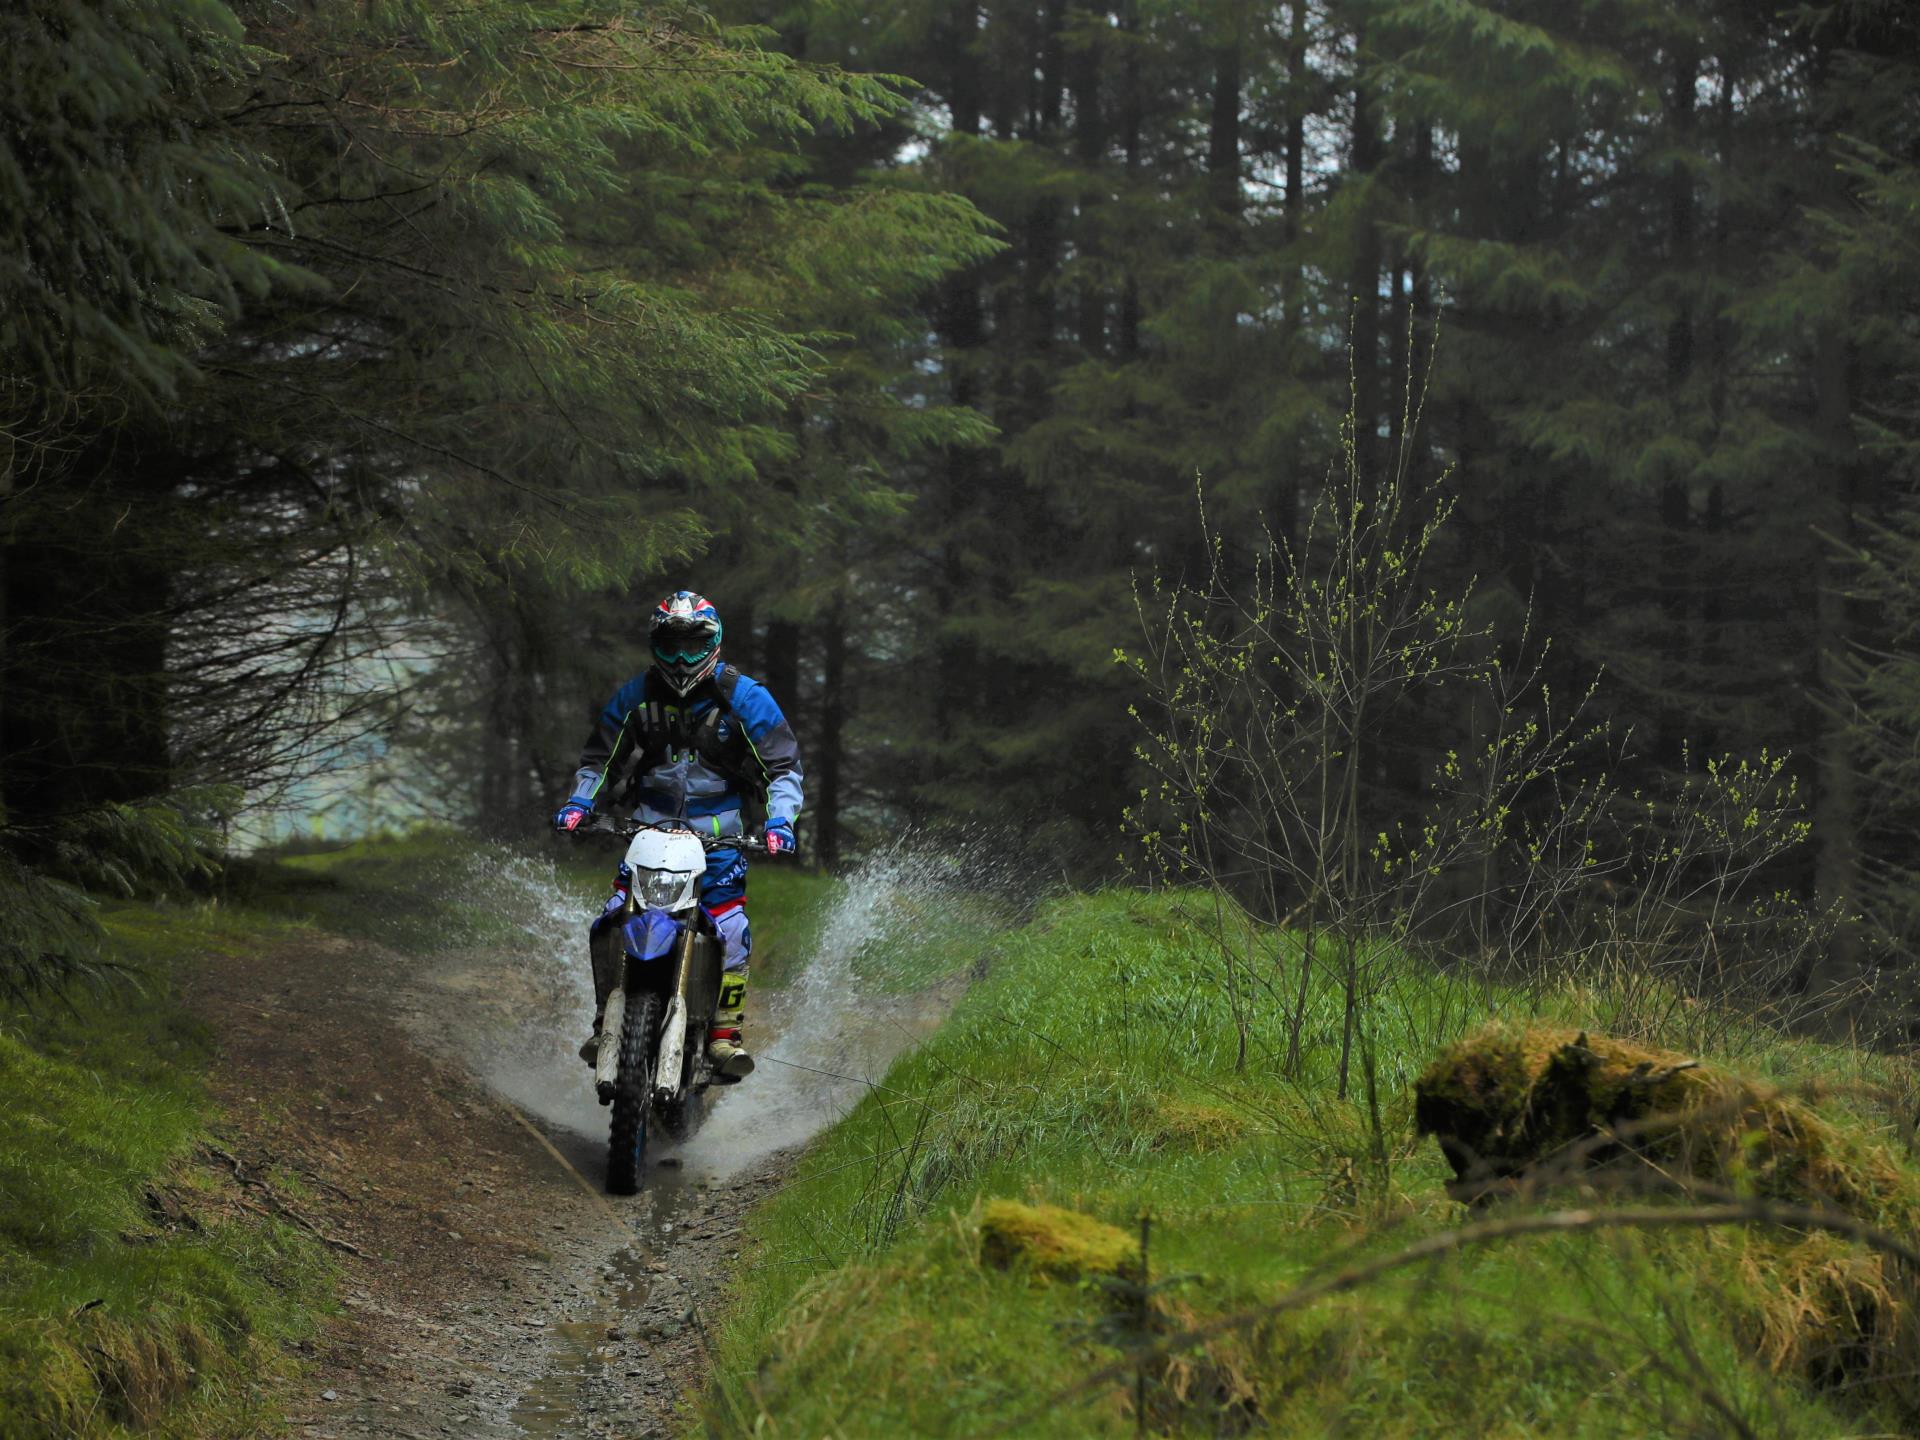 Yamaha Off Road Experiecne - Mid Wales